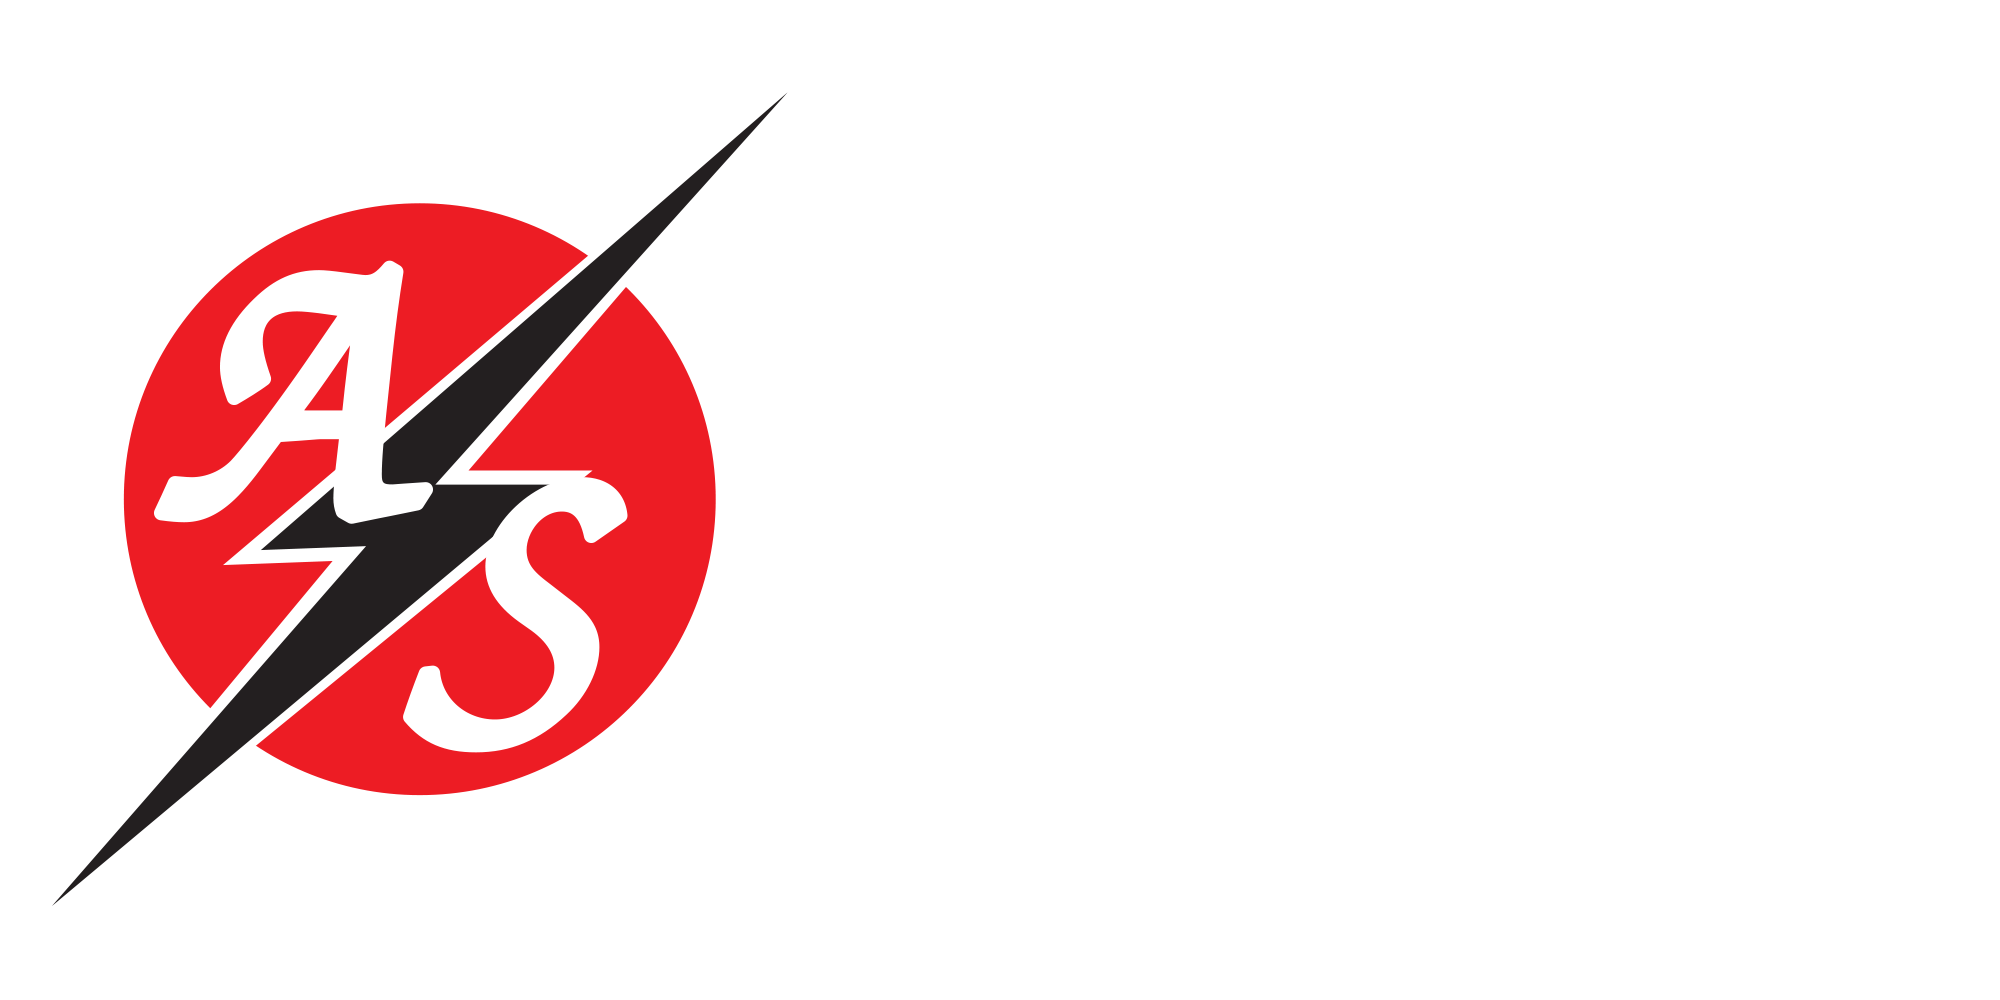 Anand Syndicats